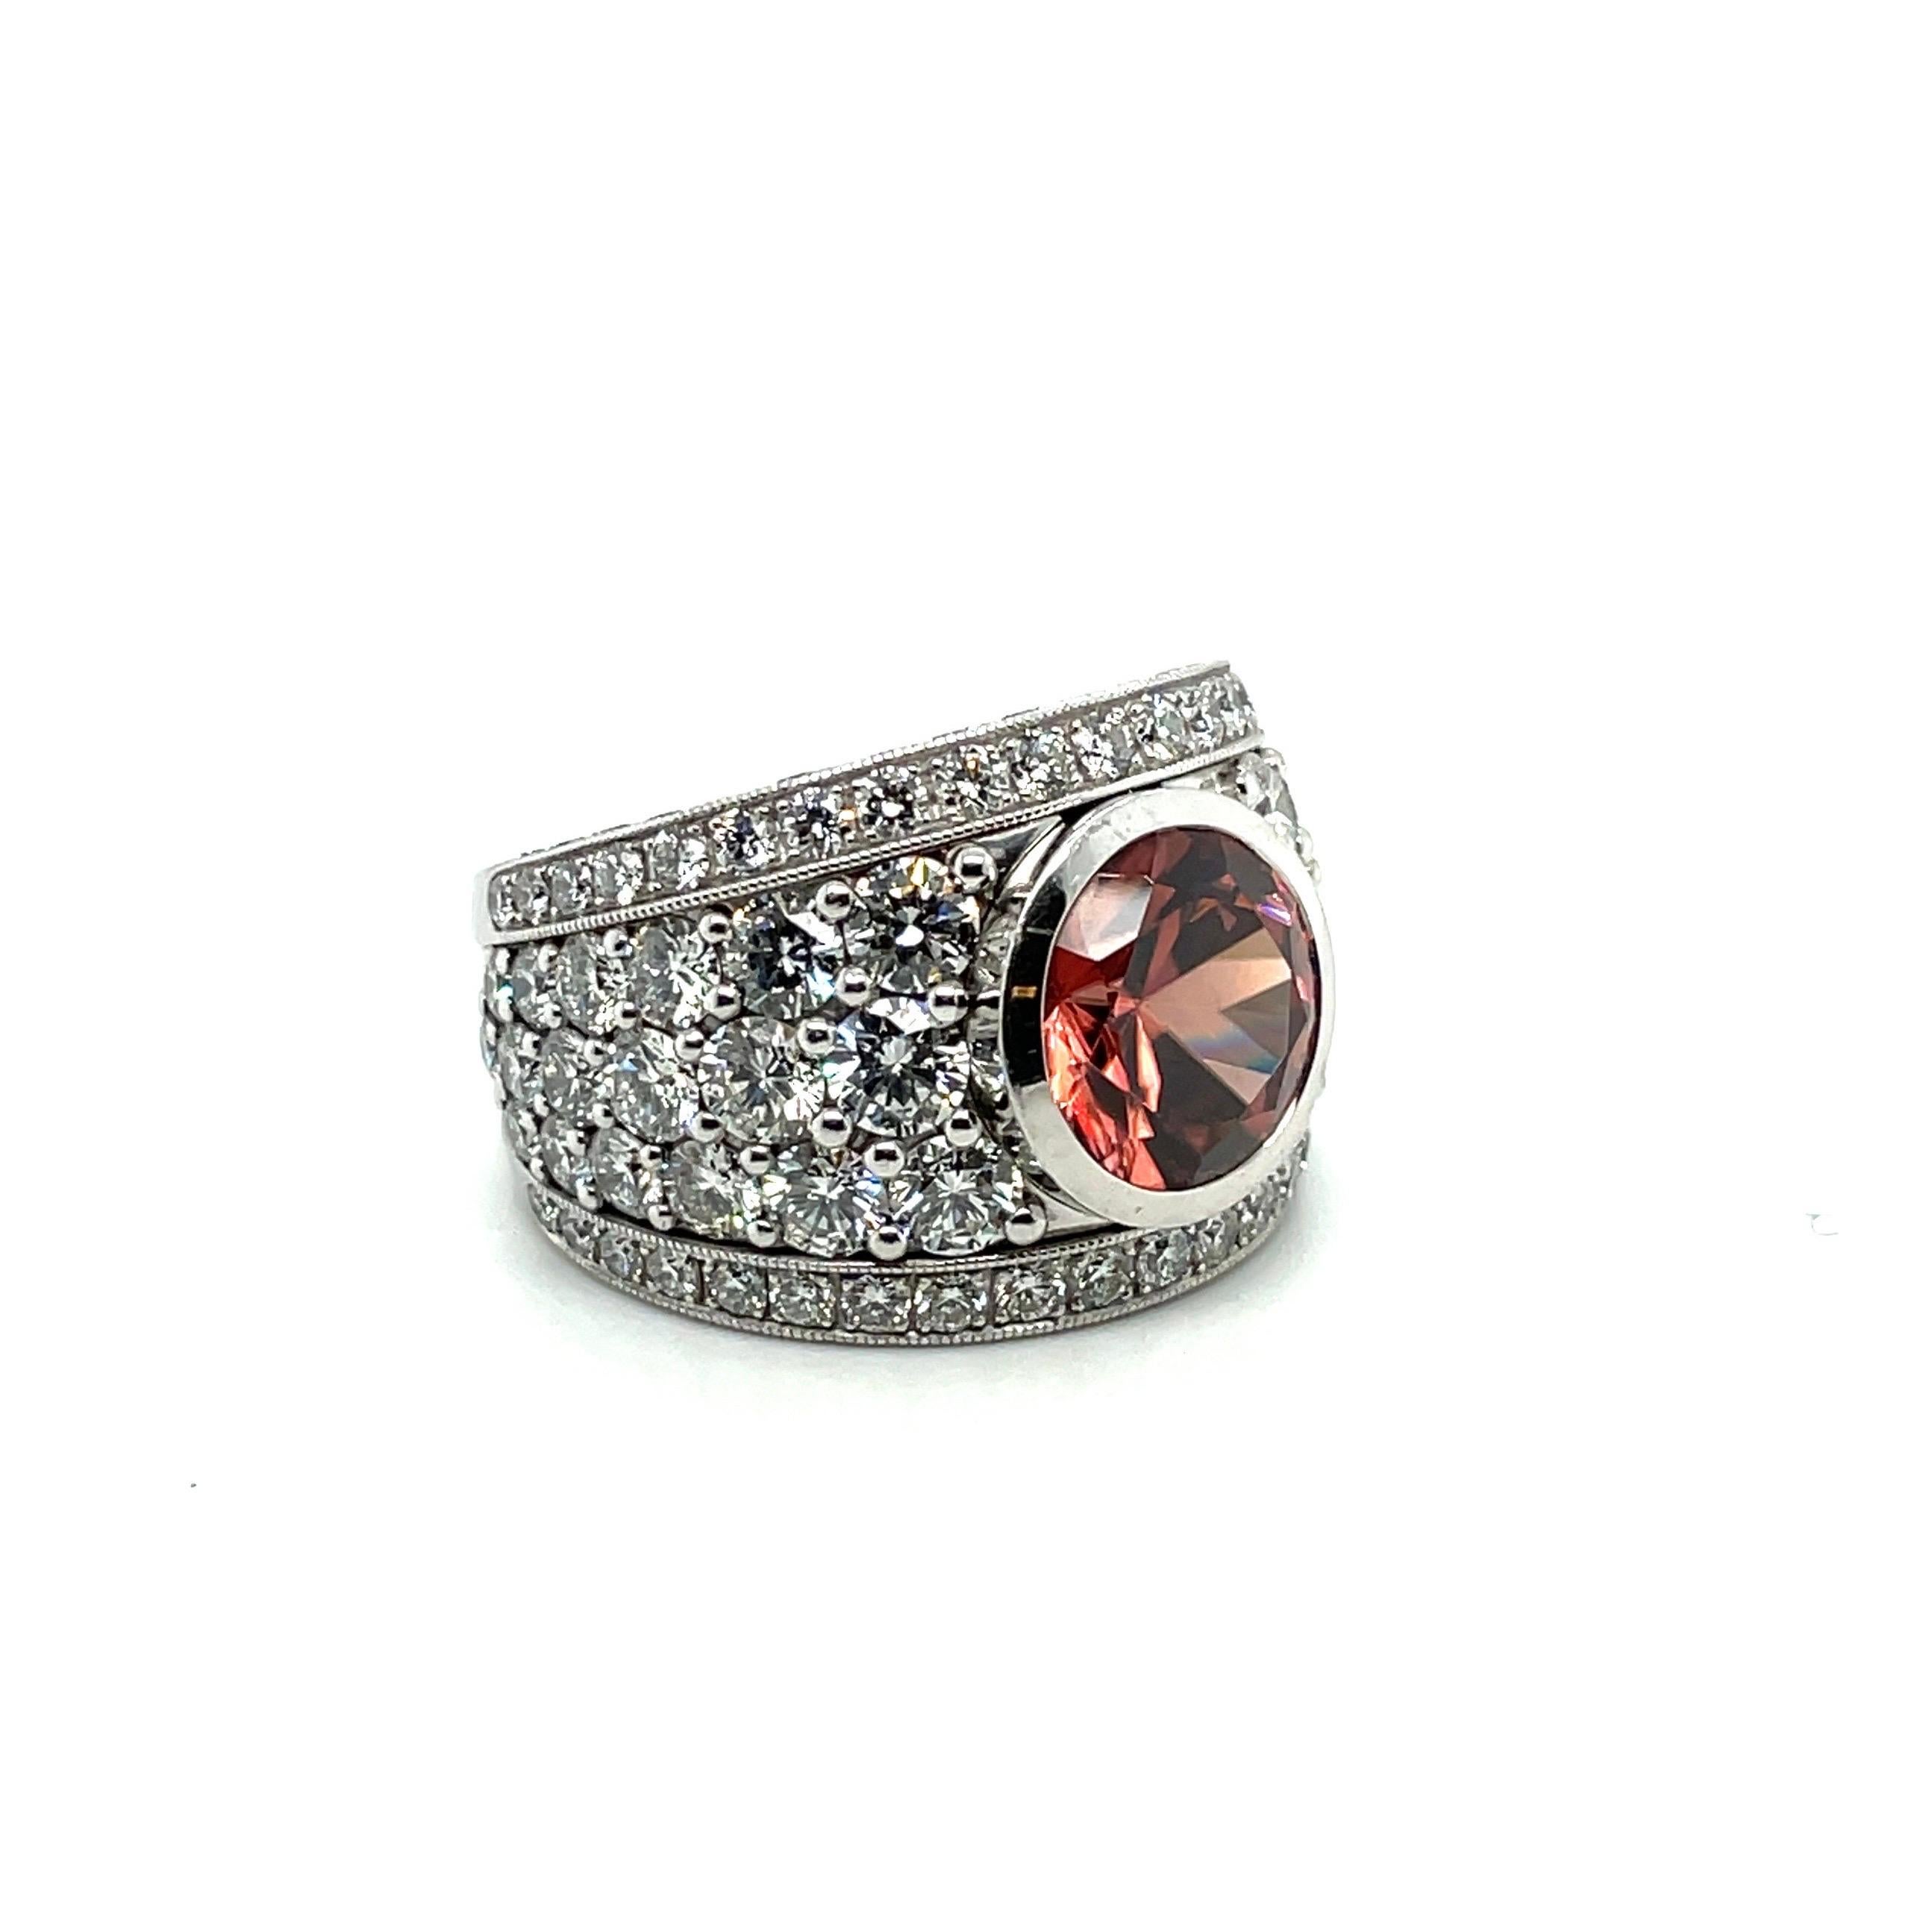 Exquisite 18 karat white gold Malaya Zircon and Diamond Cocktail ring, by renowned Swiss Jeweller Péclard. 

Eye-catching, slightly bombé Cocktail ring, centering upon a fine, round, pink-brown Malaya Zircon of approximately 7.14 carats, and